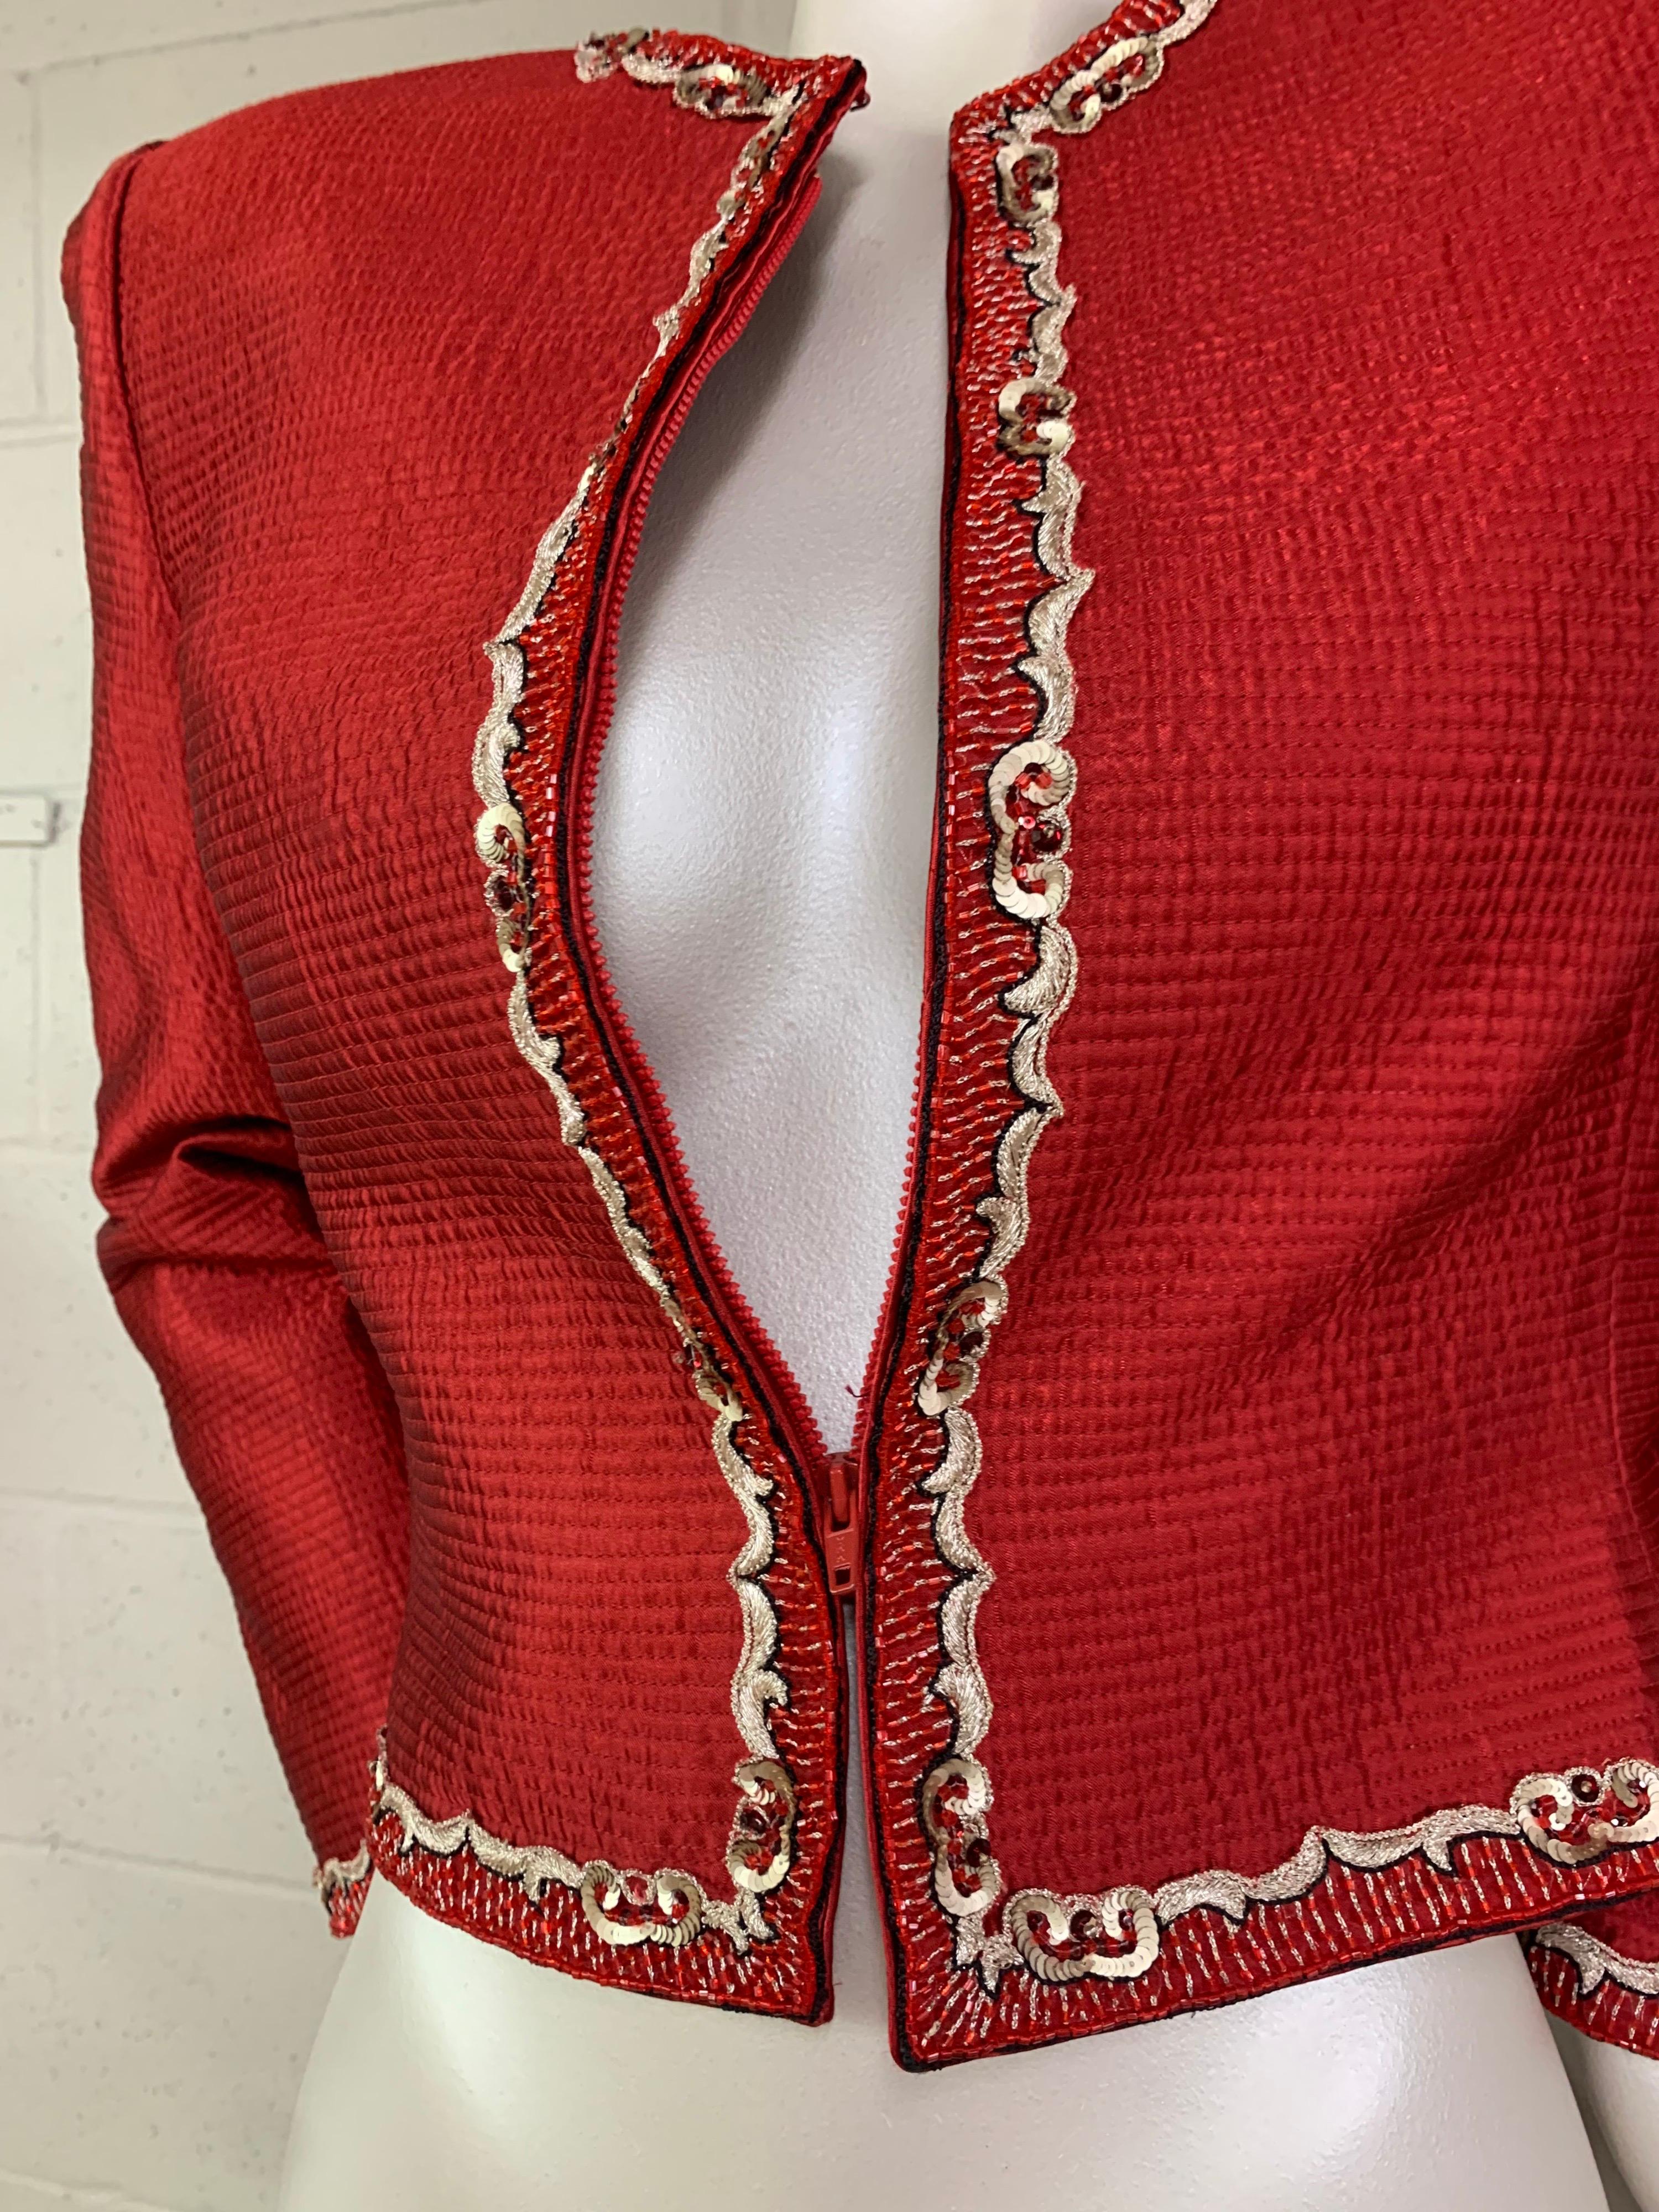 1980s Mary McFadden Red Textured Silk Zip-Front Jacket w/ Embroidery Trim 4